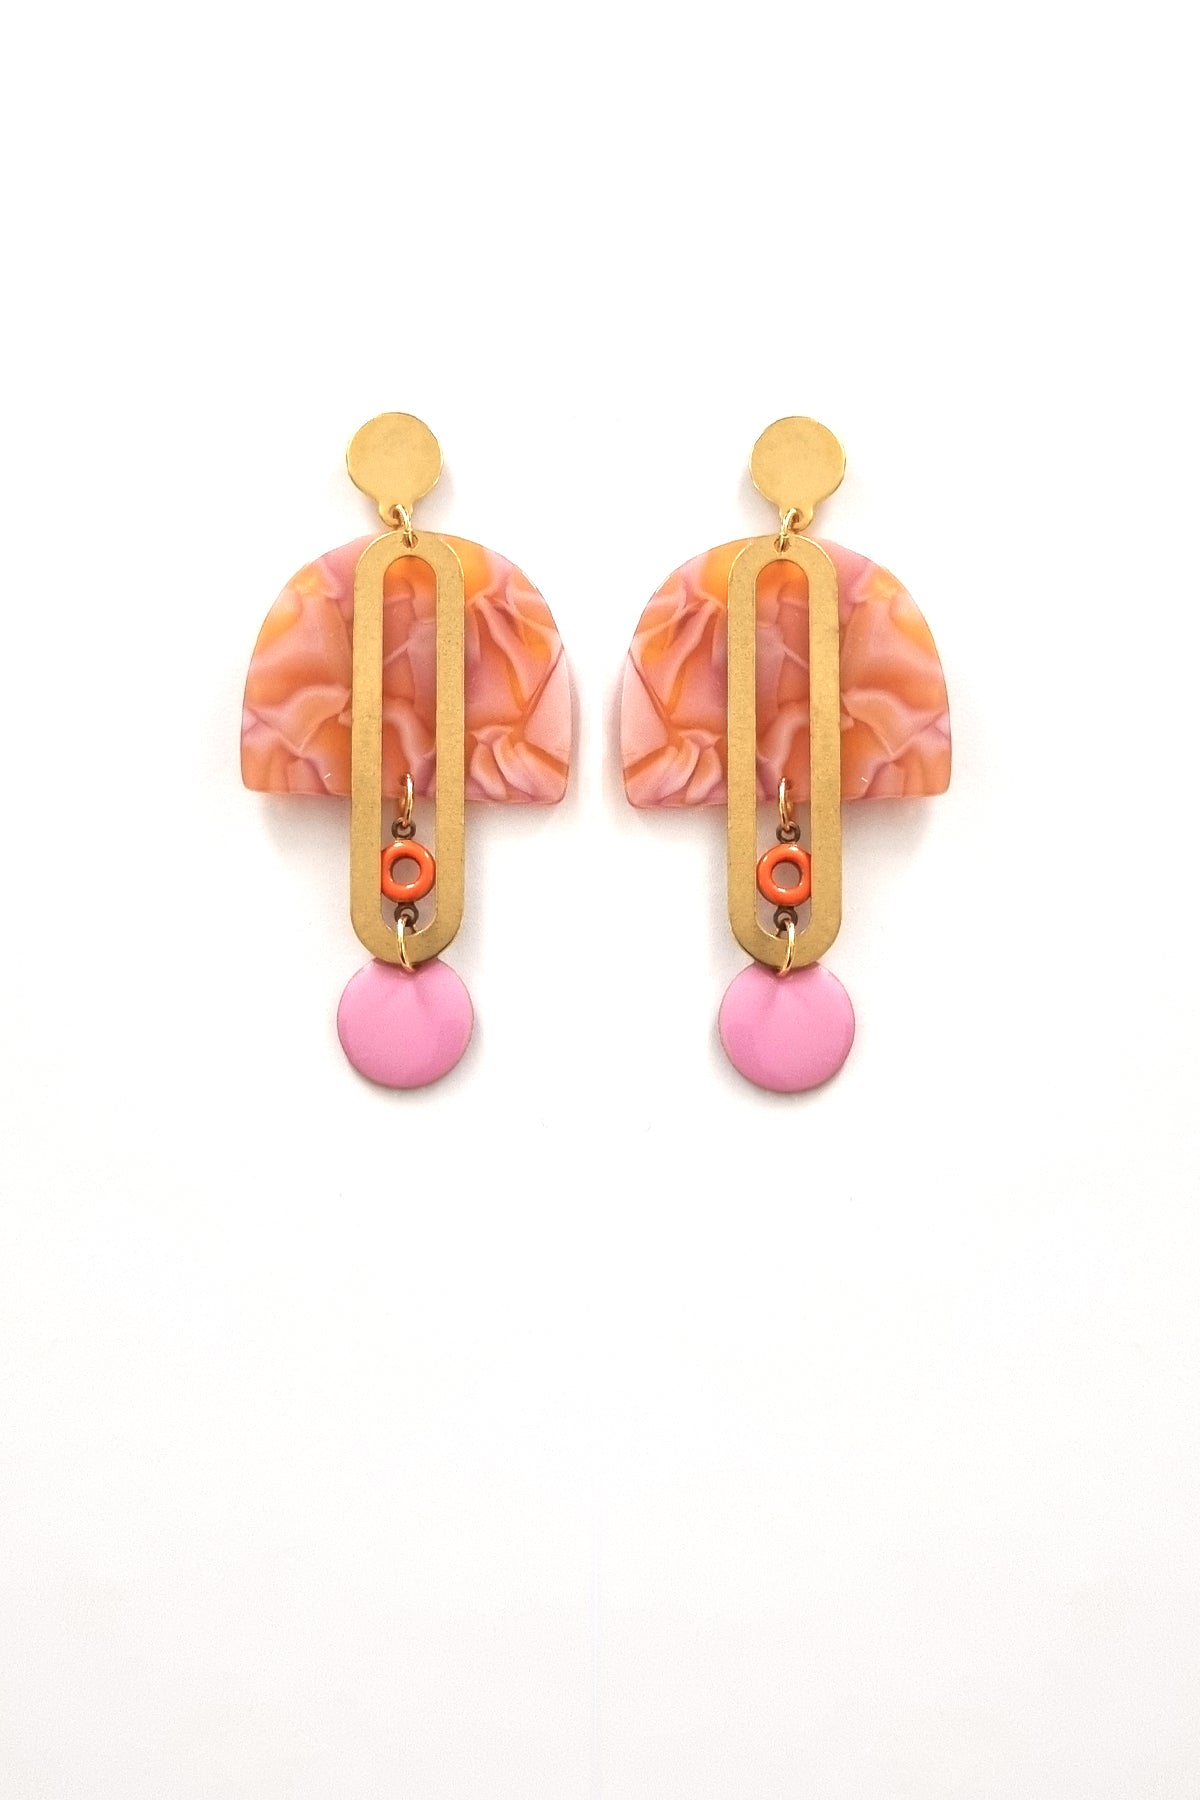 A pair of stud dangle earrings sits against a white background. They feature an orange and orchid multicoloured acrylic arch, an elongated oval brass piece with a small orange enamel connector attaching the acrylic piece to the brass, and at the bottom hangs an orchid enamel dot.